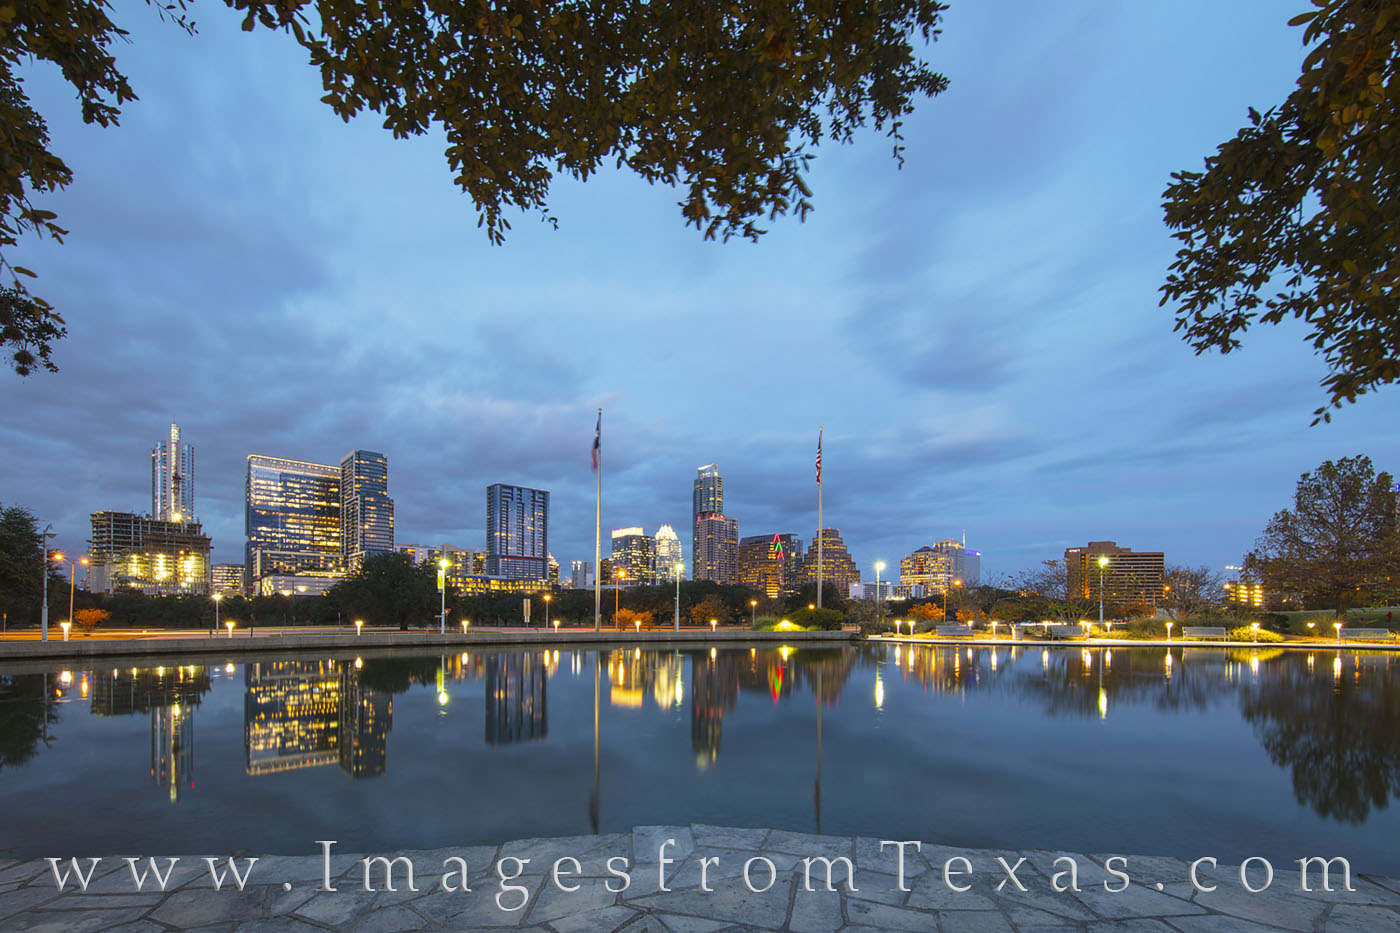 The Austin skyline rises into a cold December evening as reflections of the high rises shimmer in the still water near the Long...